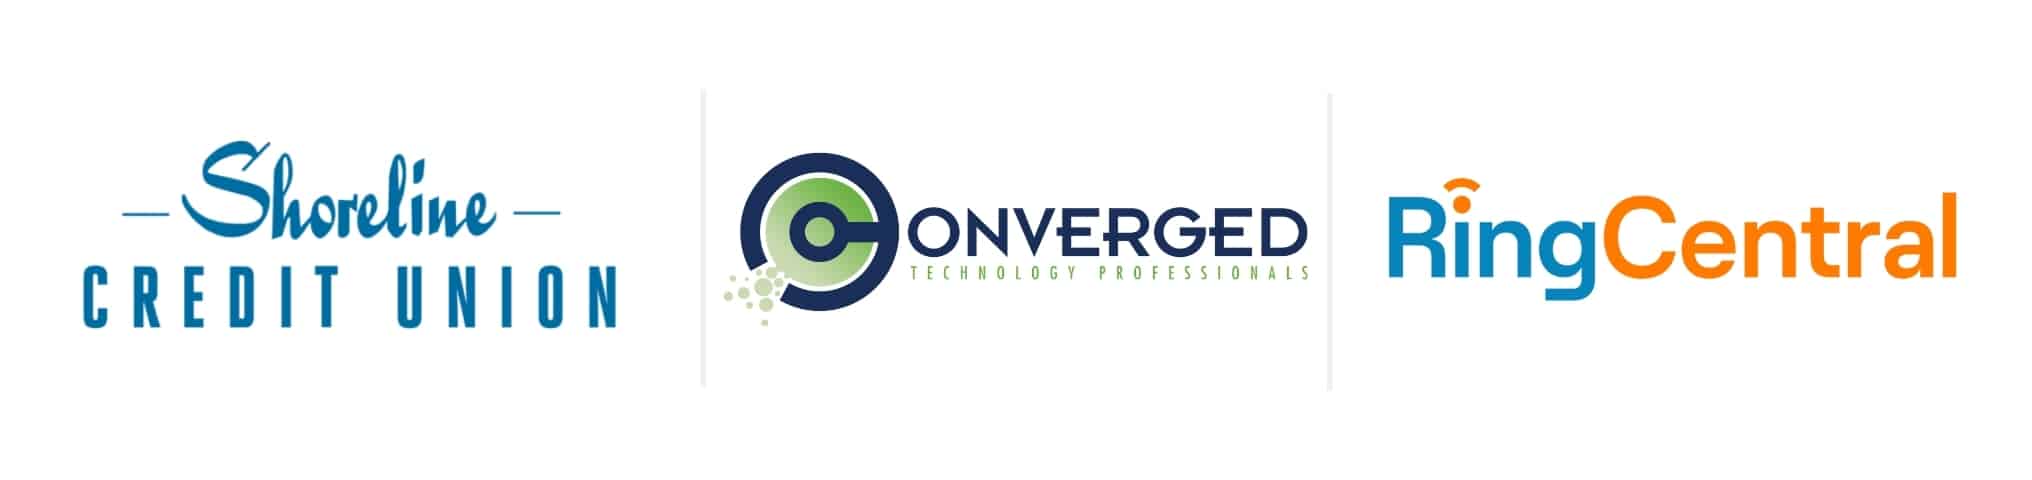 Shoreline | Converged | RingCentral